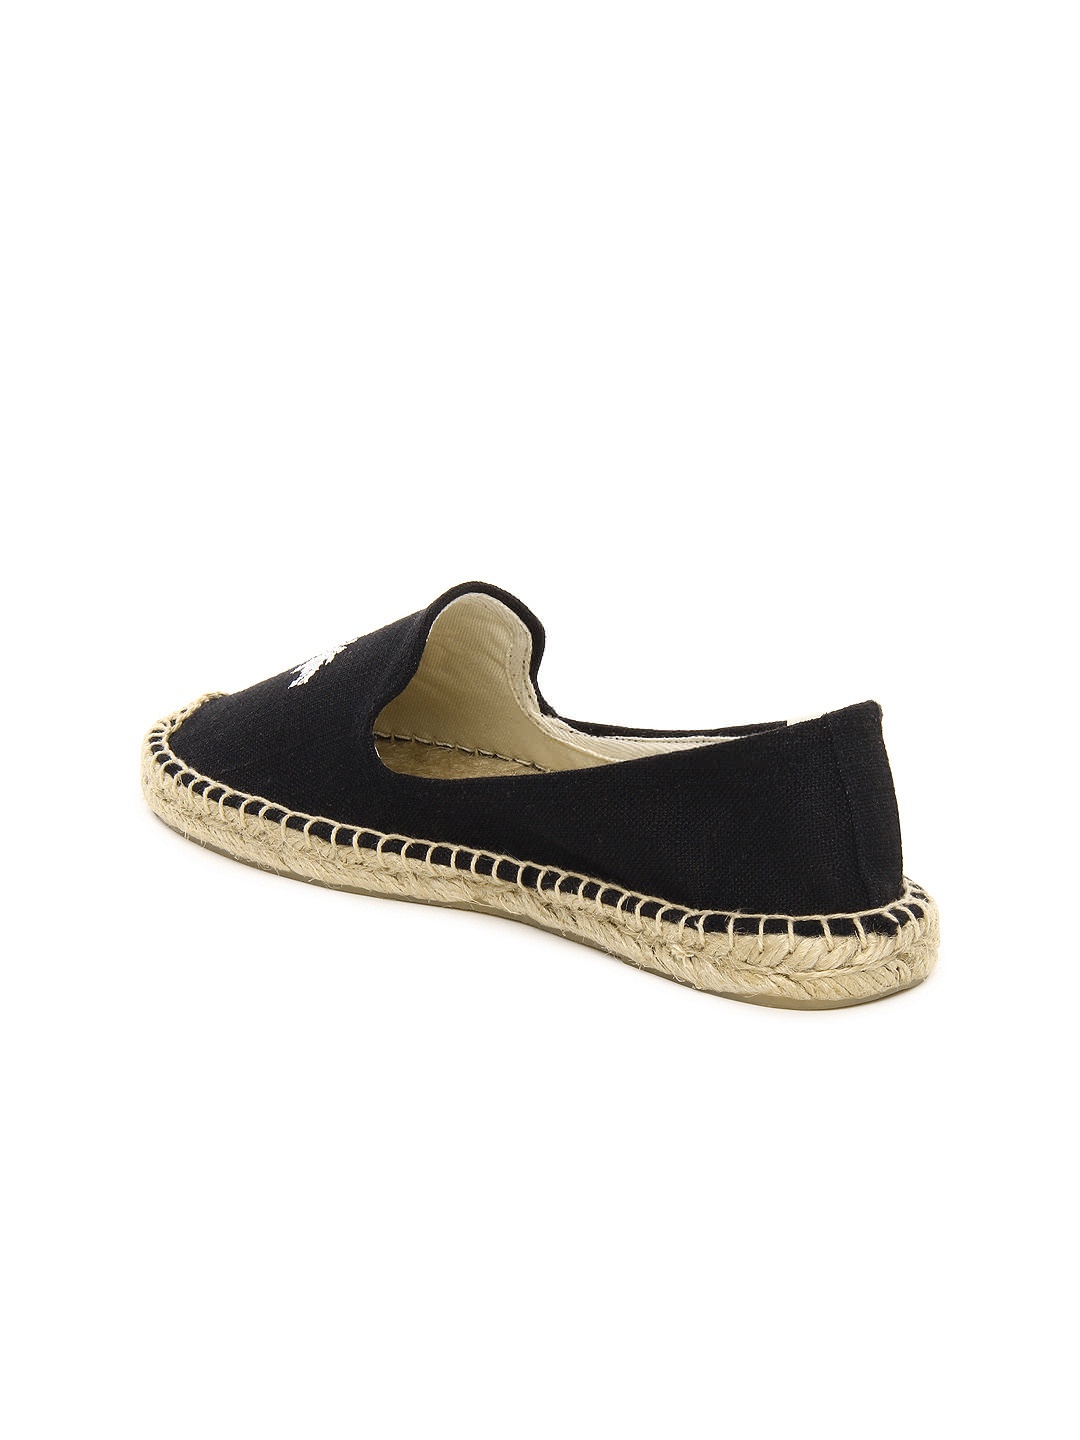 View Product Details More Flats by Soludos More Black Flats More Flats